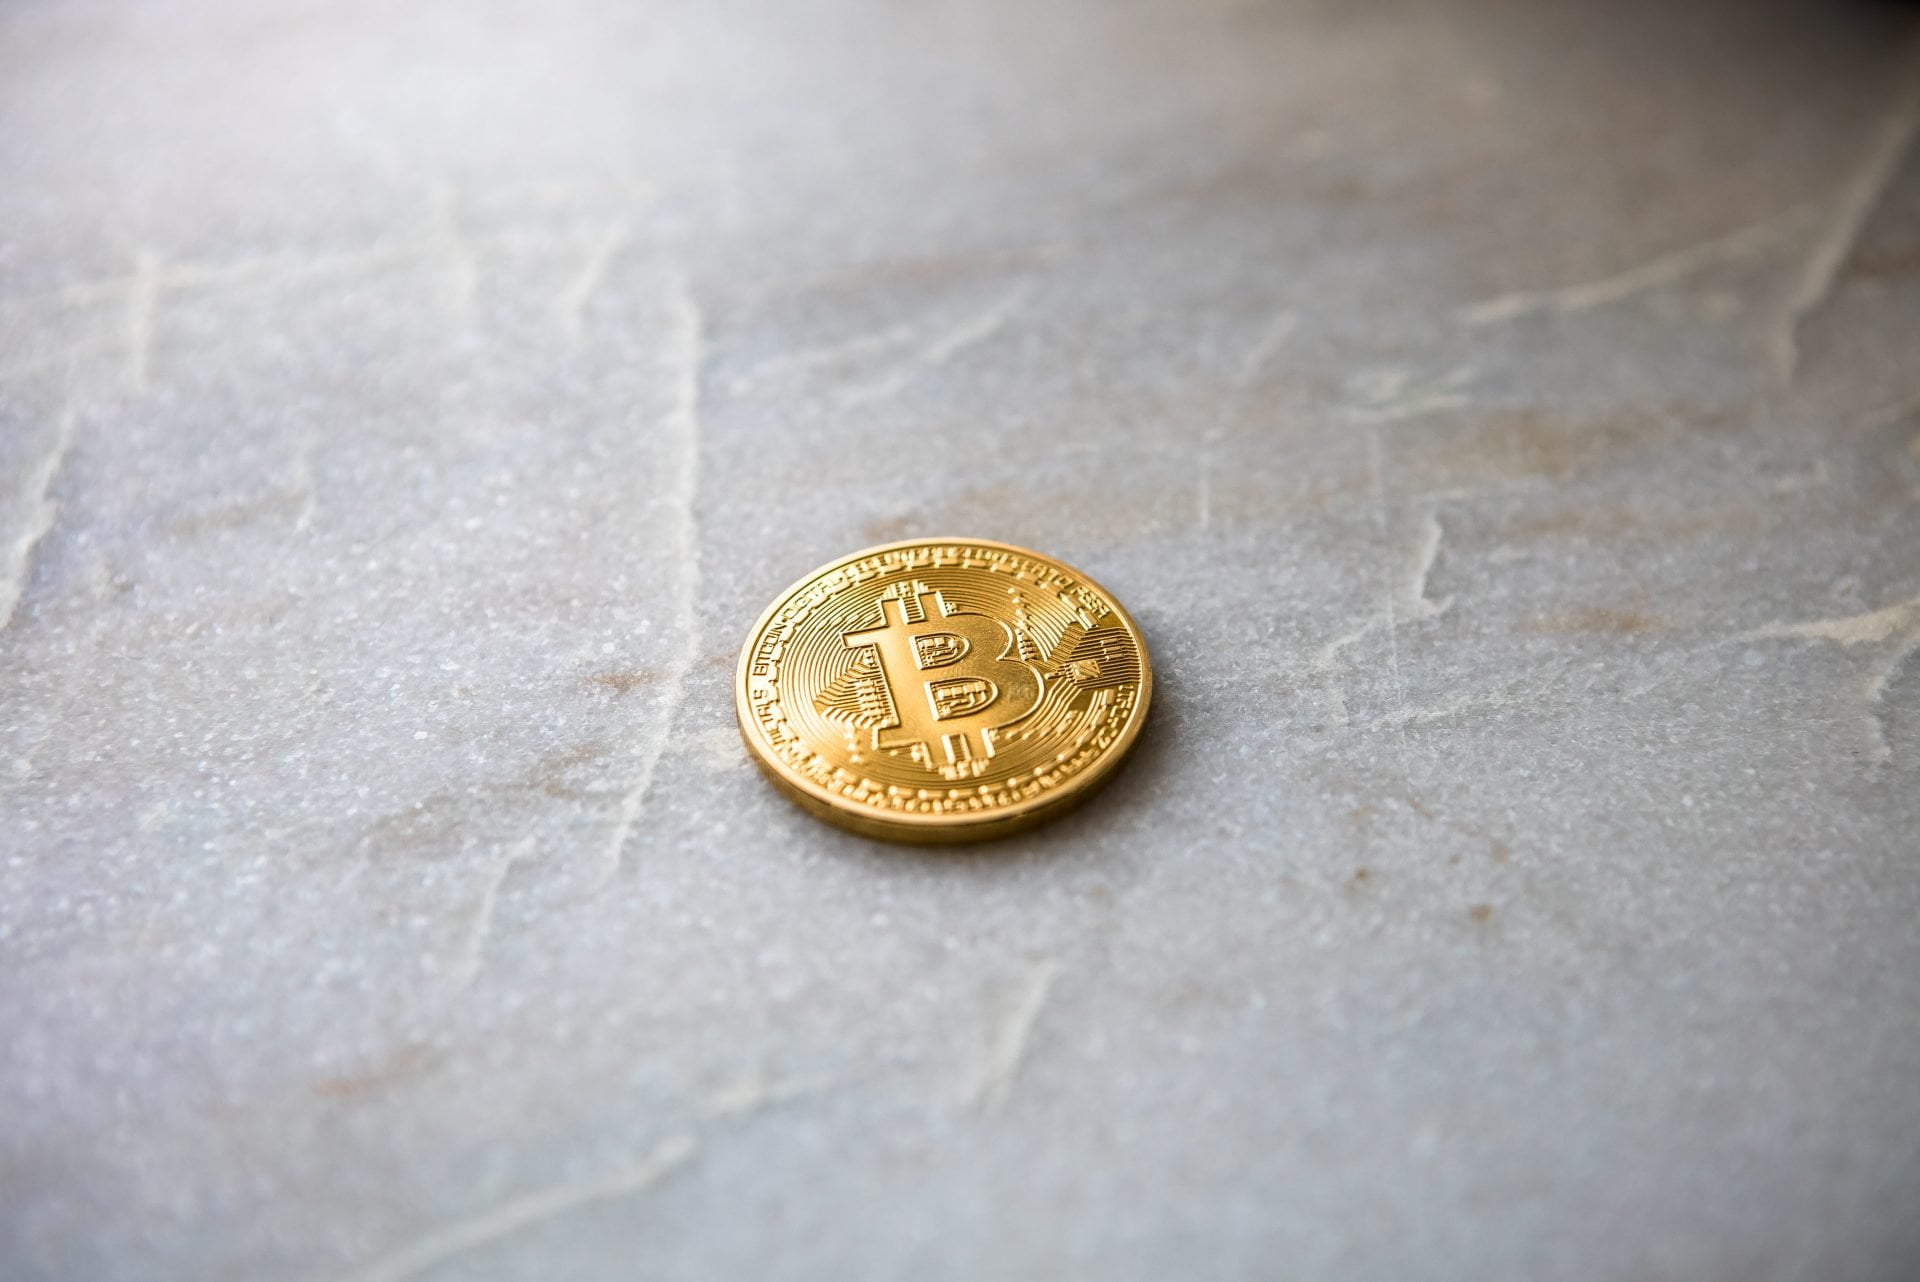 Institutional Bitcoin Interest Wanes as BTC Price Falls Under $10,000 22